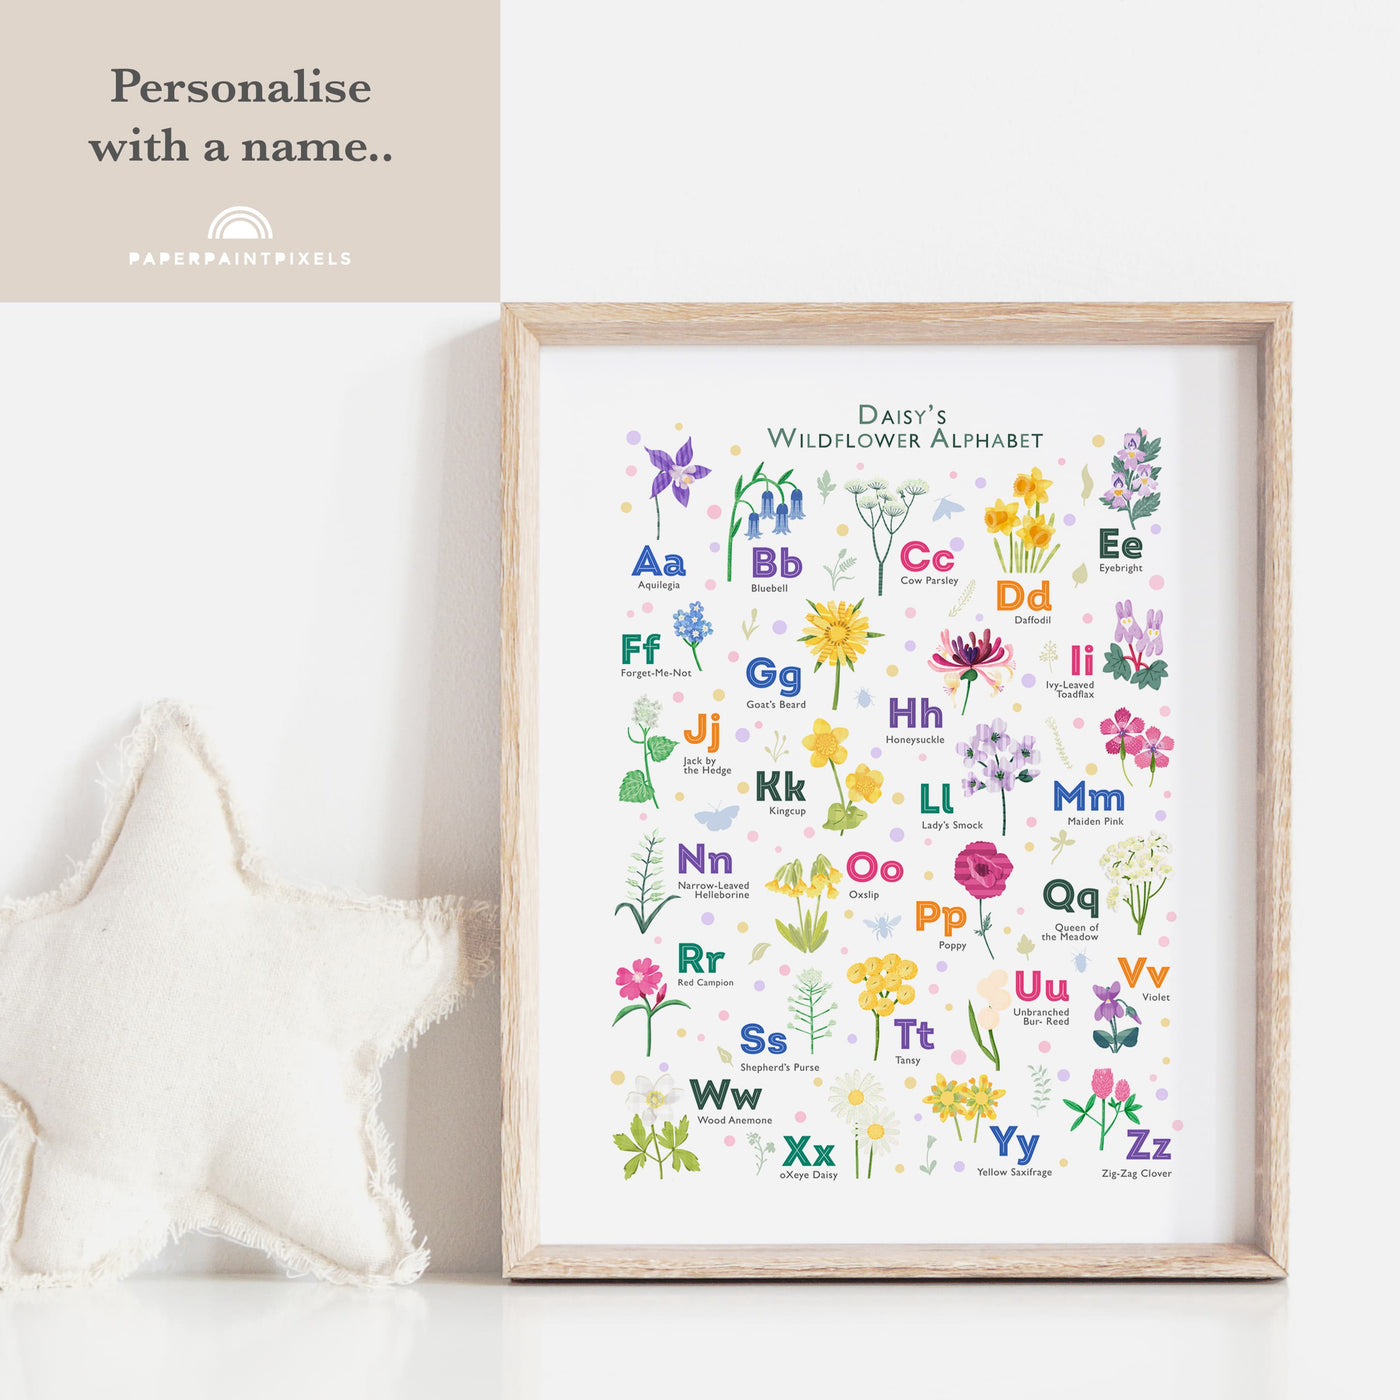 Image of a personalized wildflower alphabet print with the name "Daisy" written in the personalization box.